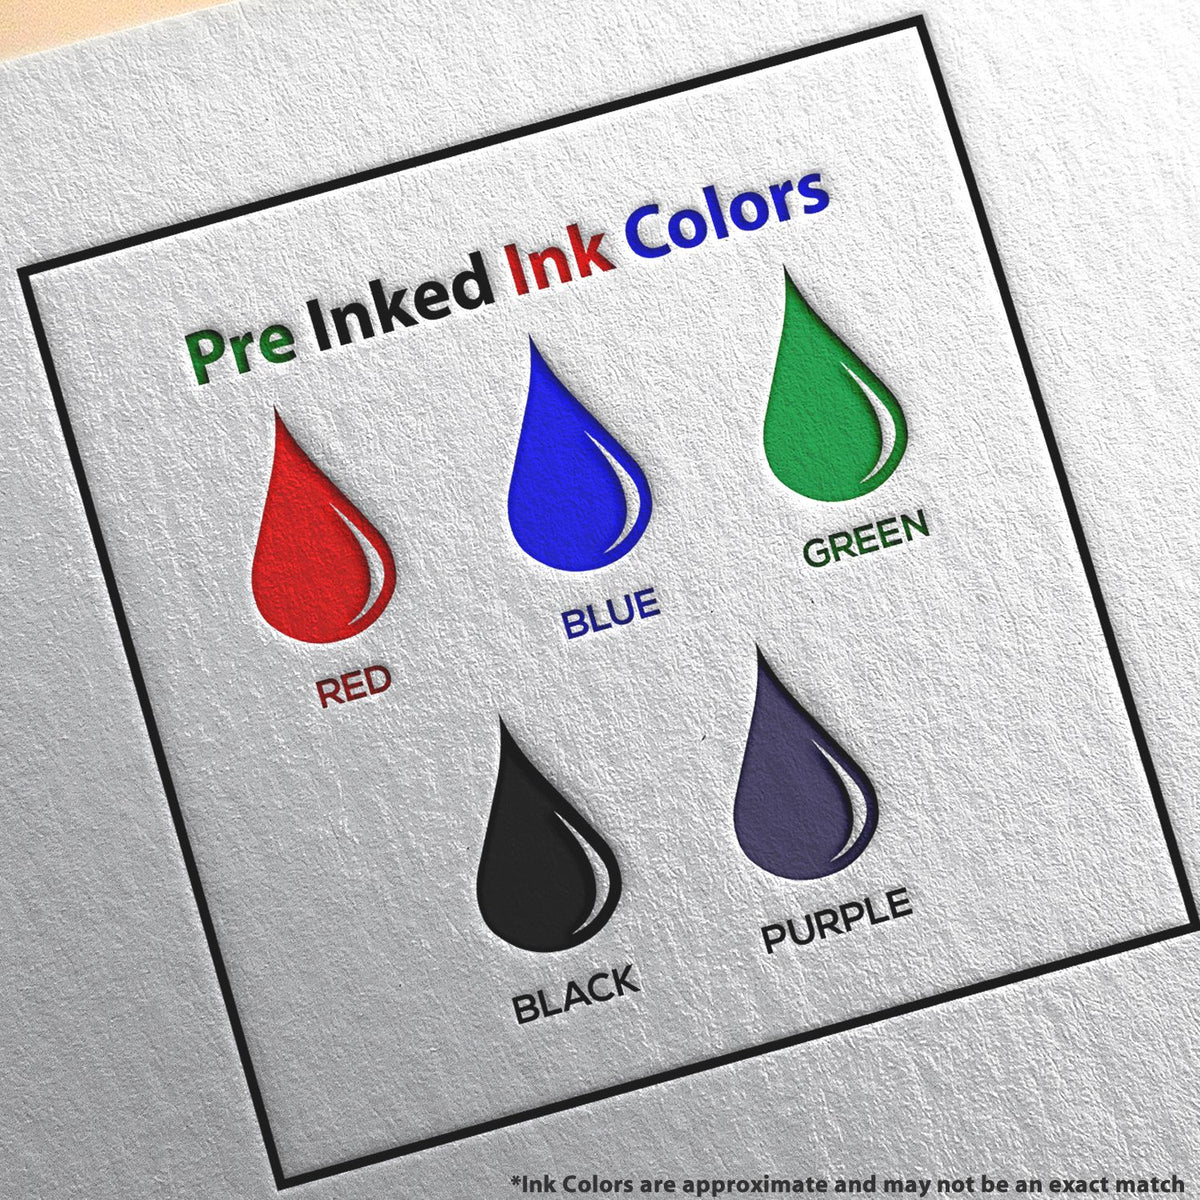 A picture showing the different ink colors or hues available for the Slim Pre-Inked Massachusetts Professional Engineer Seal Stamp product.